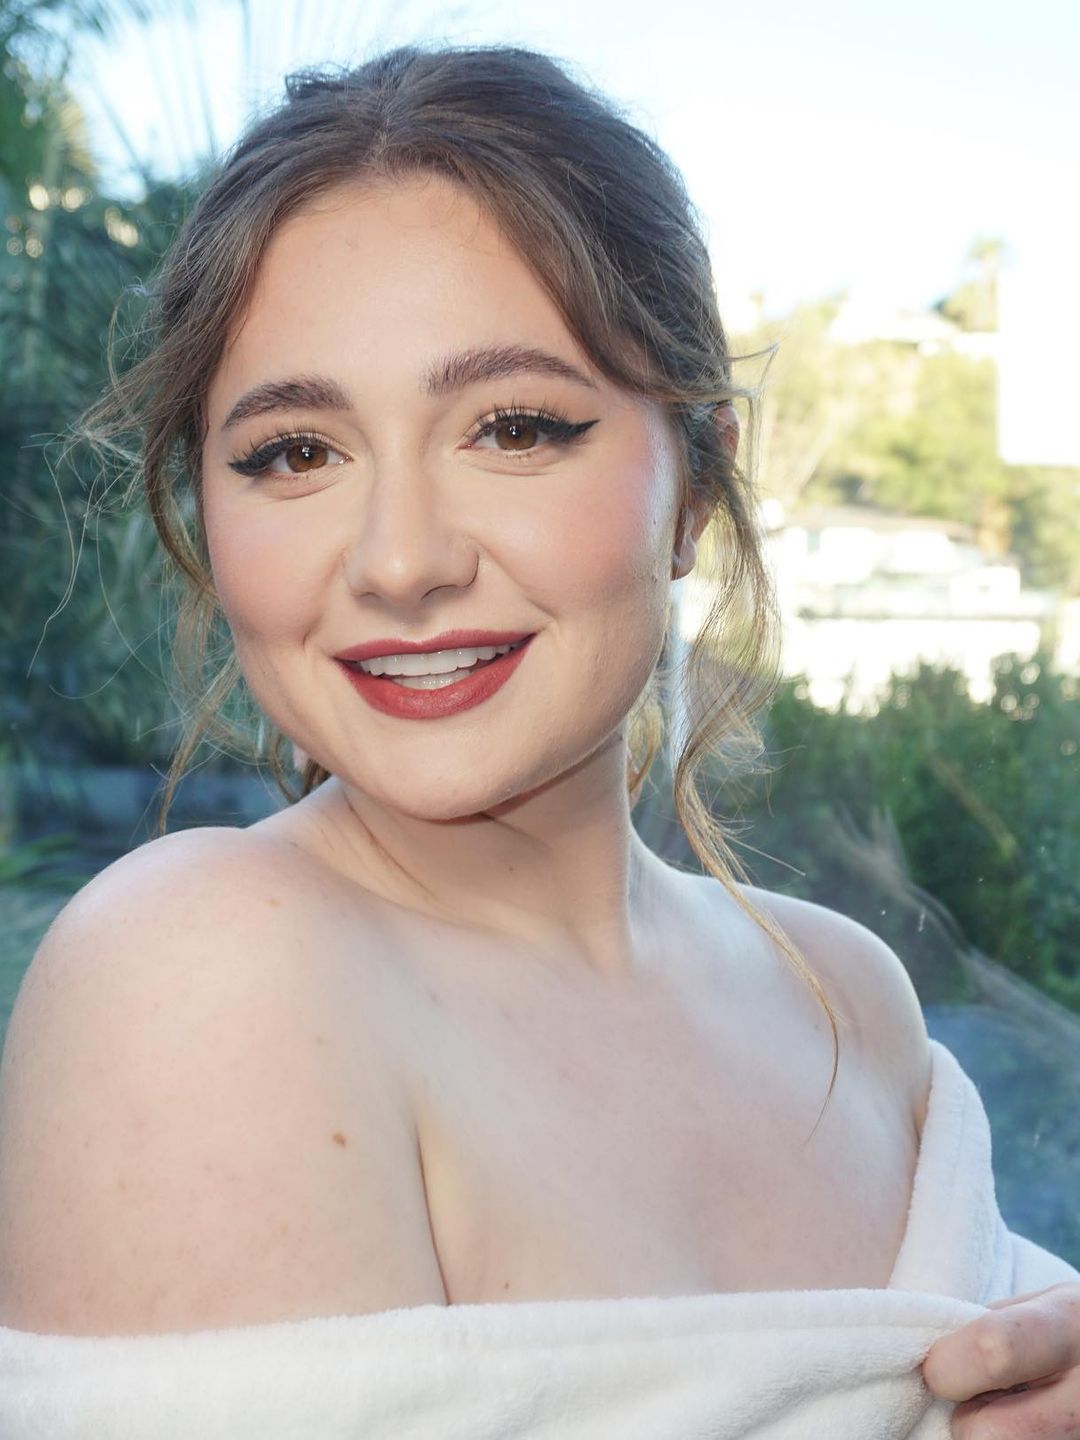 Emma Kenney who is her mother